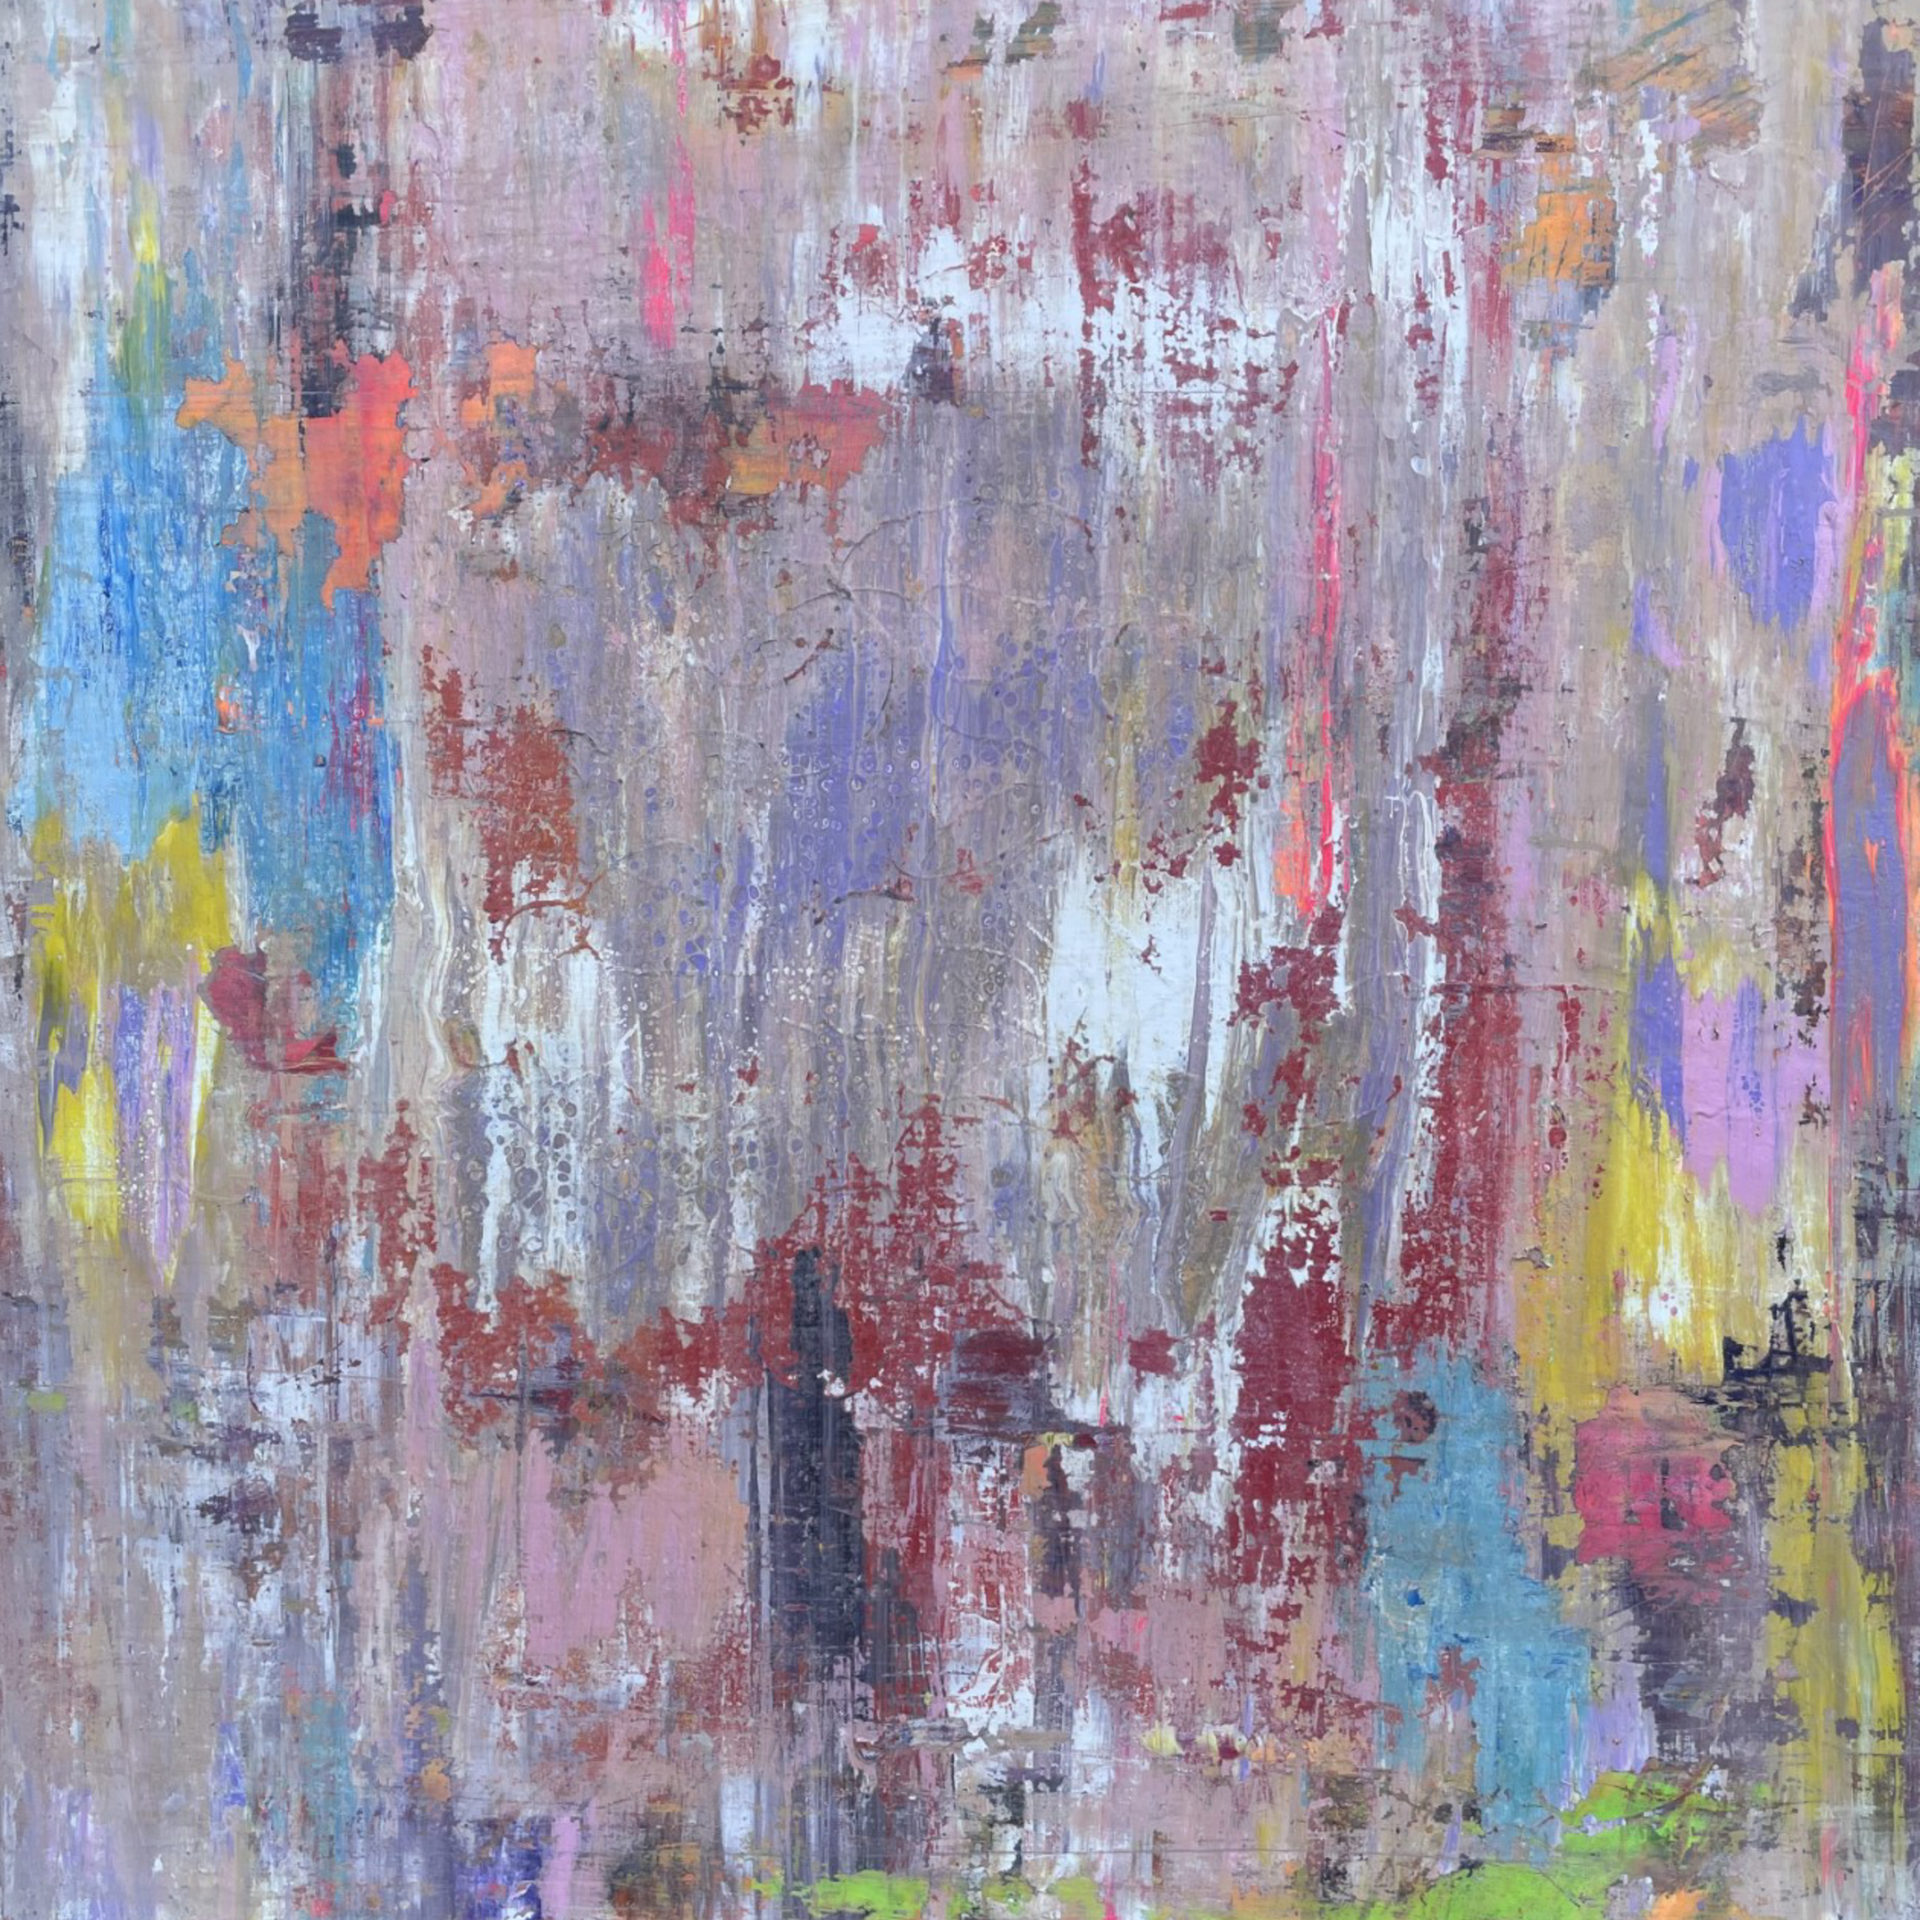 old paint layered piece of art pink blue white red and yellow 1m x 1m piece of art distressed look